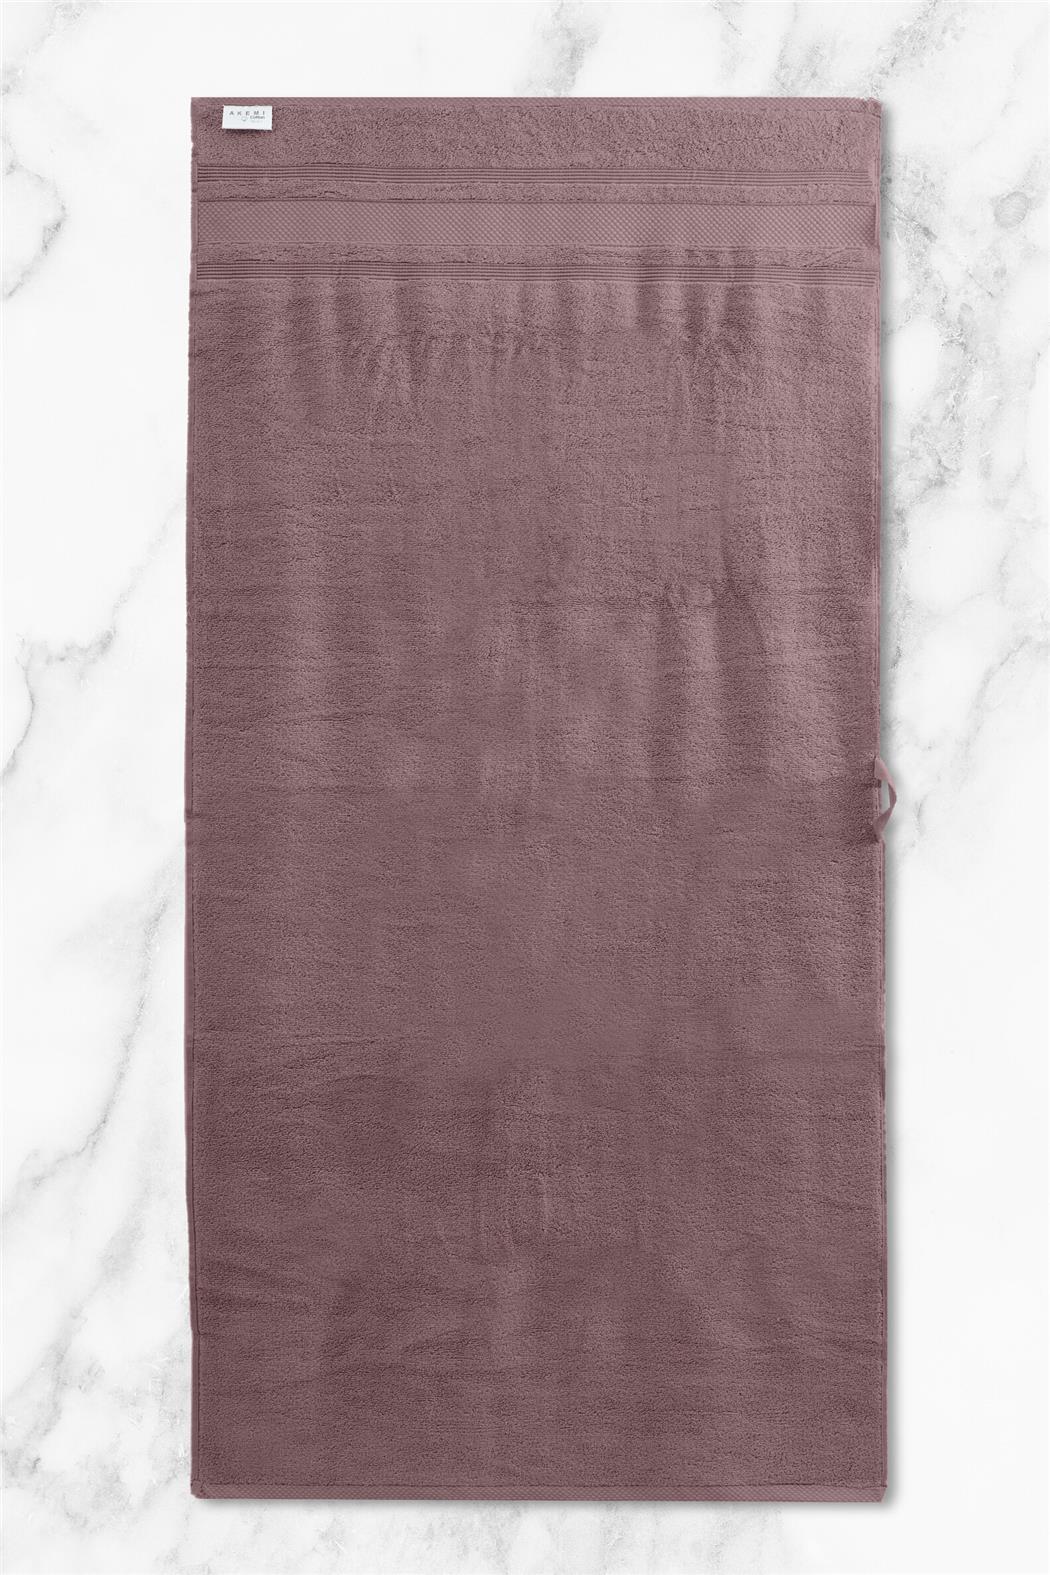 CANNON BRENTLEY EGYPTIAN ULTIMATE GRAY BATH TOWEL - Temptations - Malaysia  Airlines